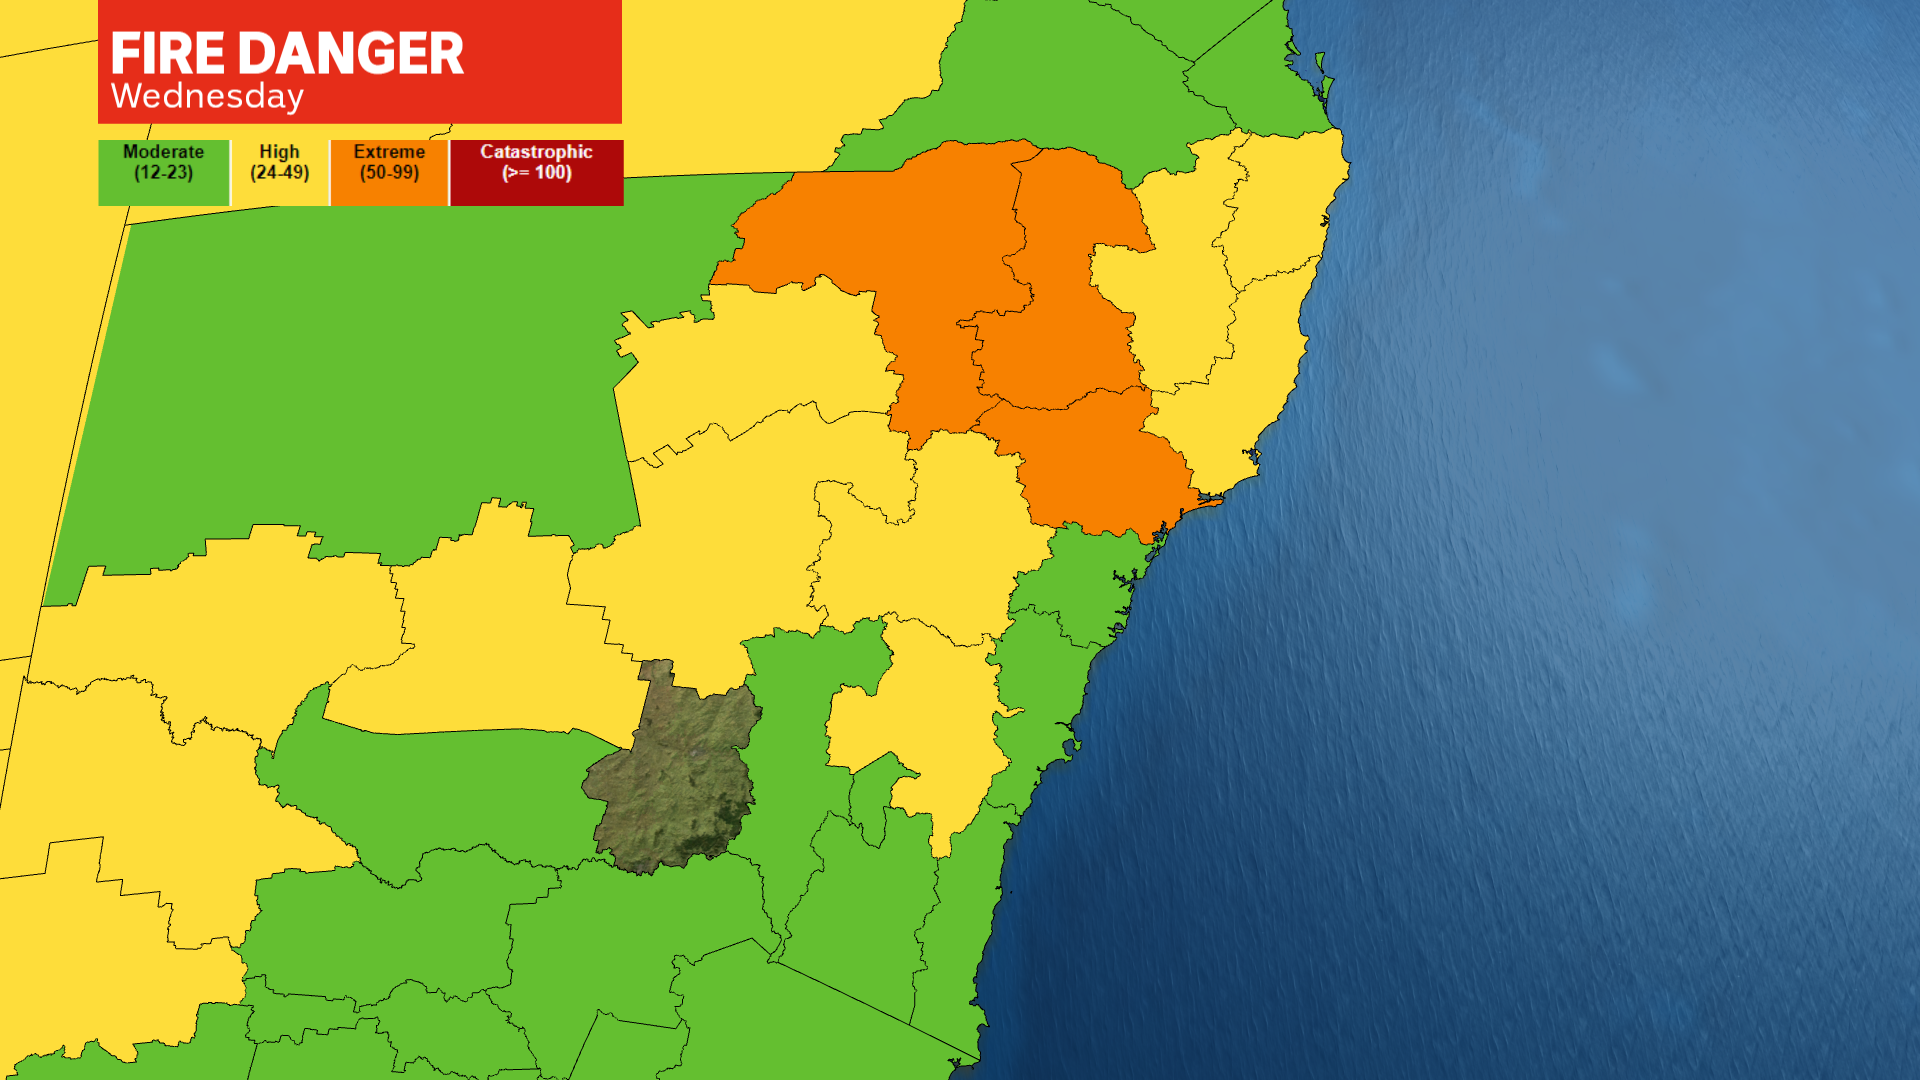 Map of NSW marked in green, yellow and orange by fire risk